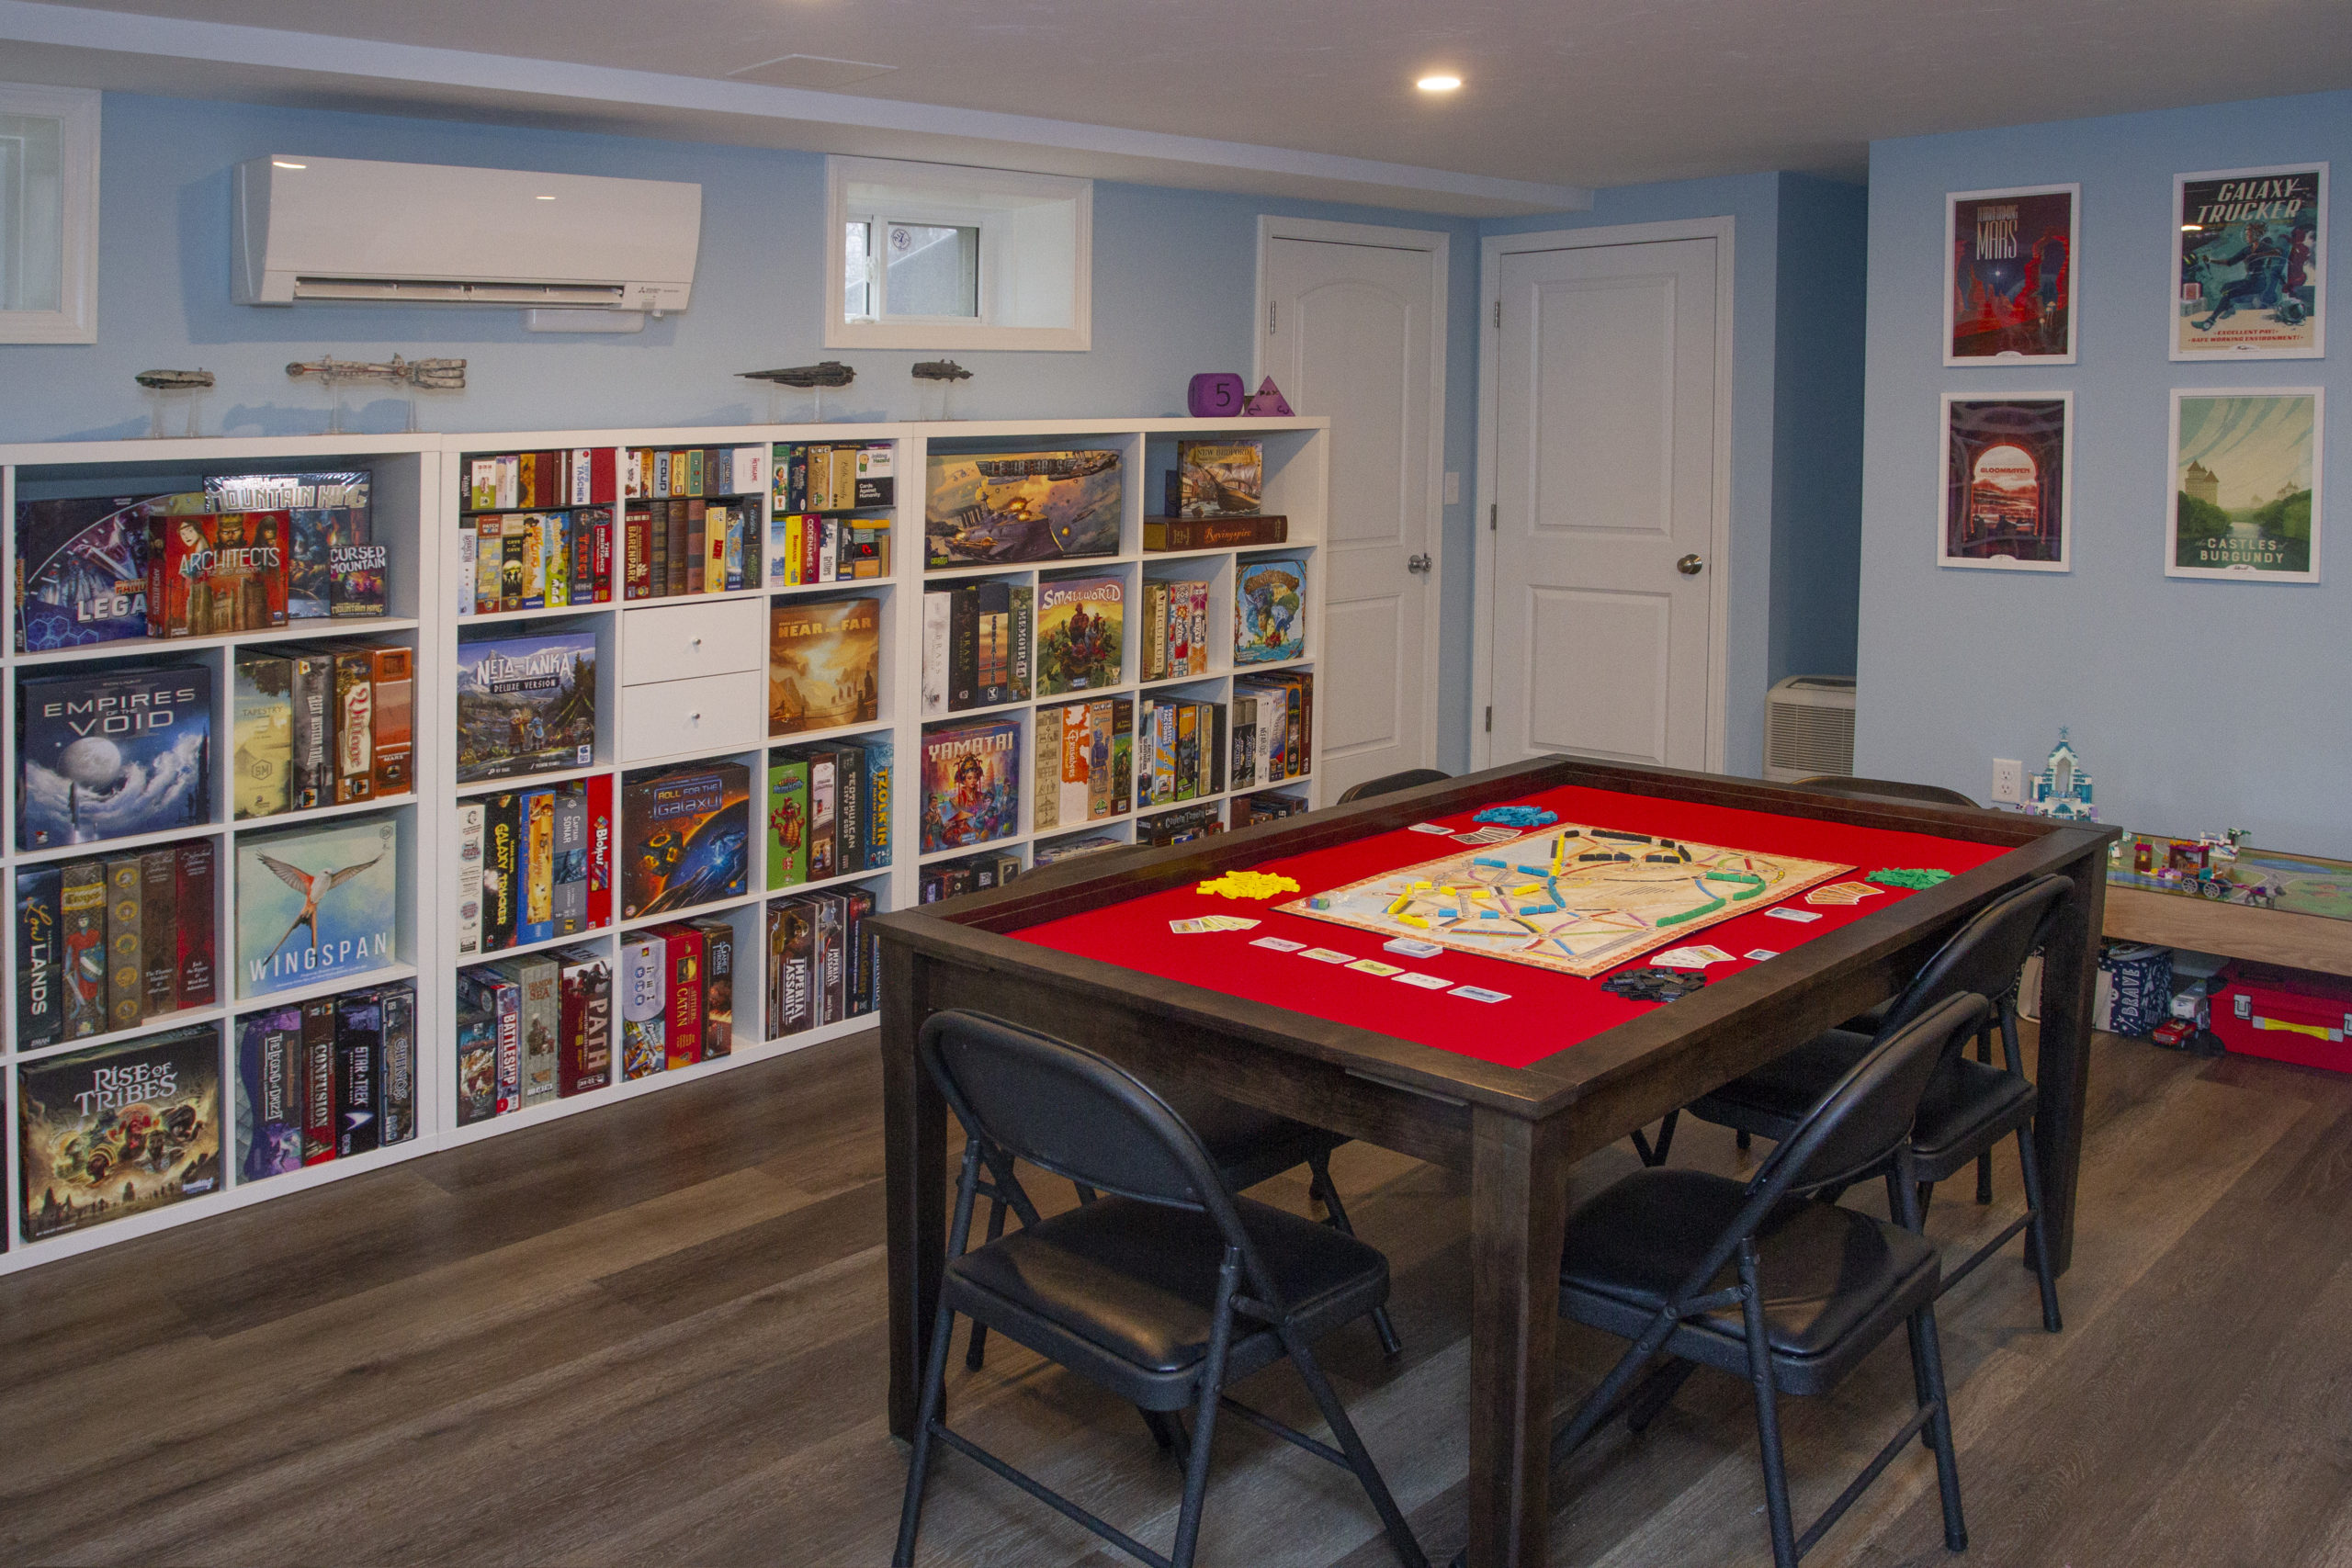 a basement renovation for board game enthusiasts - j.p. hoffman